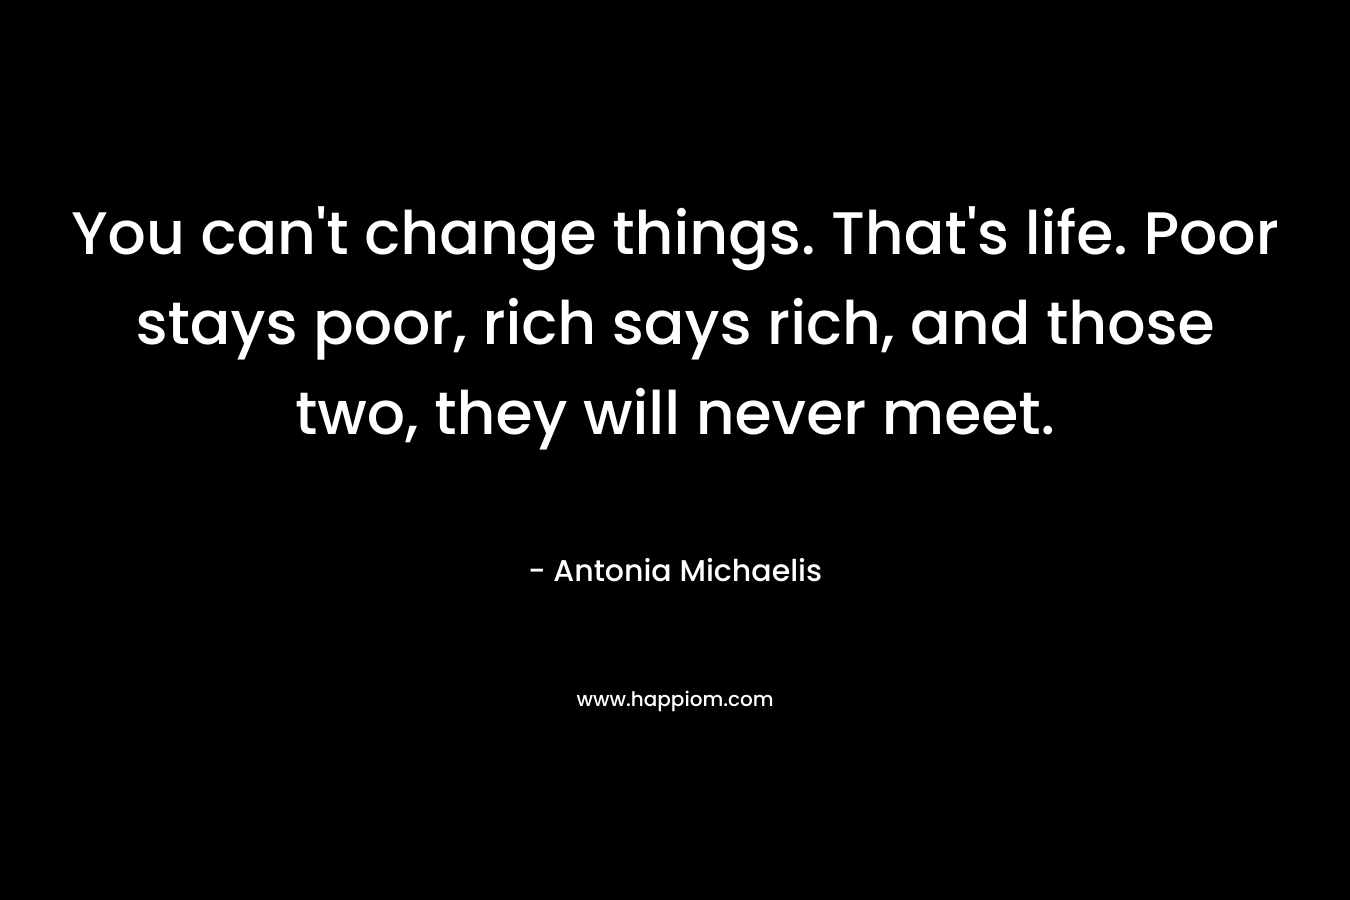 You can’t change things. That’s life. Poor stays poor, rich says rich, and those two, they will never meet. – Antonia Michaelis